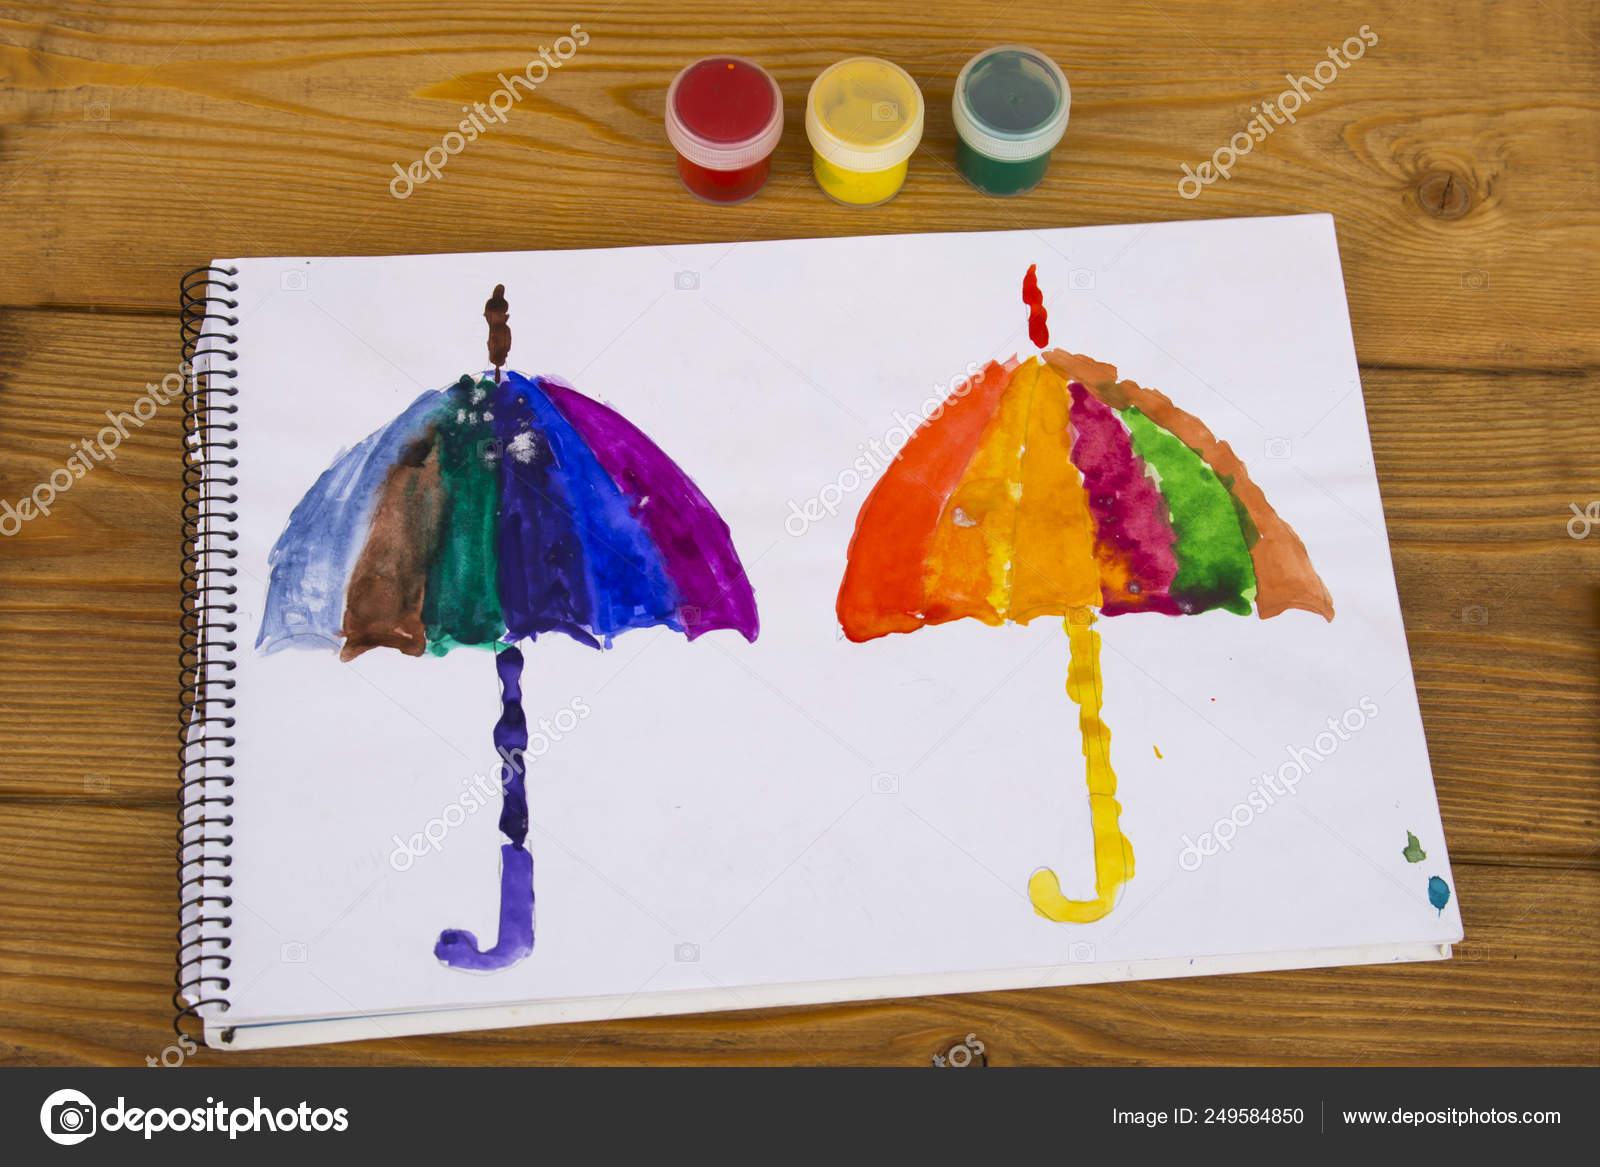 The Child Paints In Watercolor, Painting. Children's Drawing. The Kid Draws An Umbrella In All The Colors Of The Rainbow. Multicolored. Two Umbrellas. Album For Drawing. Kindergarten And School Stock Photo By ©